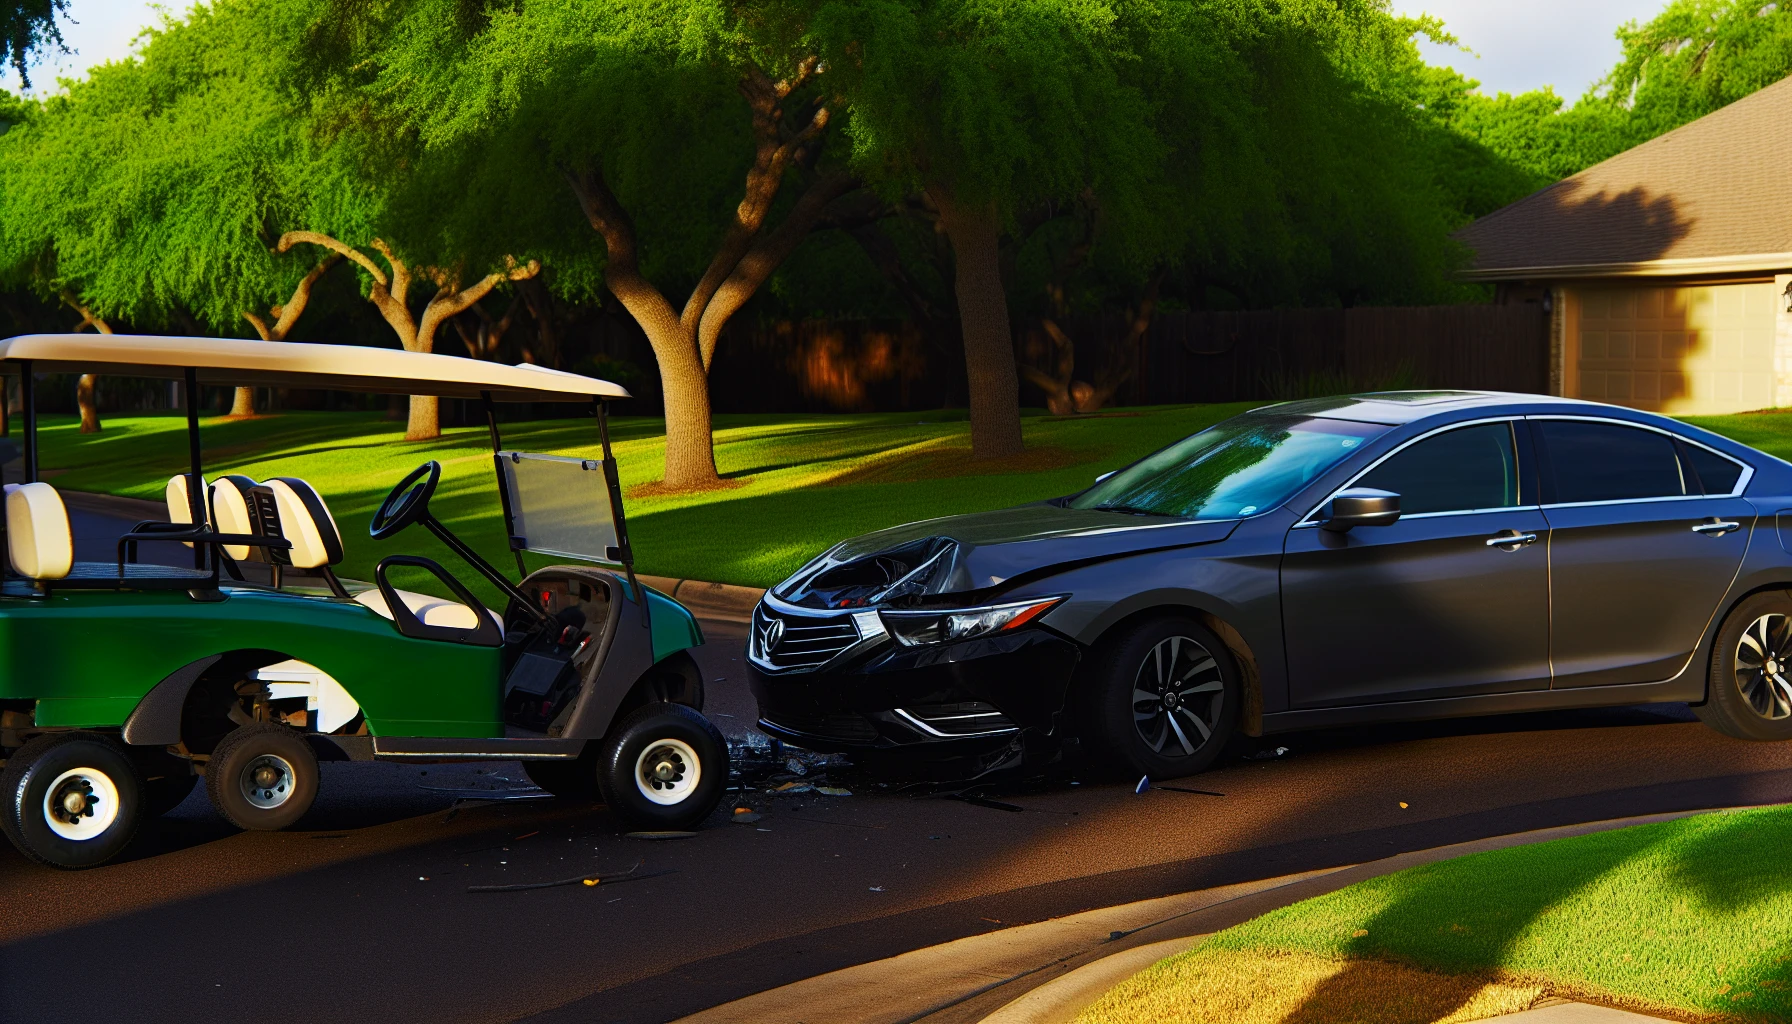 Golf cart and car collision